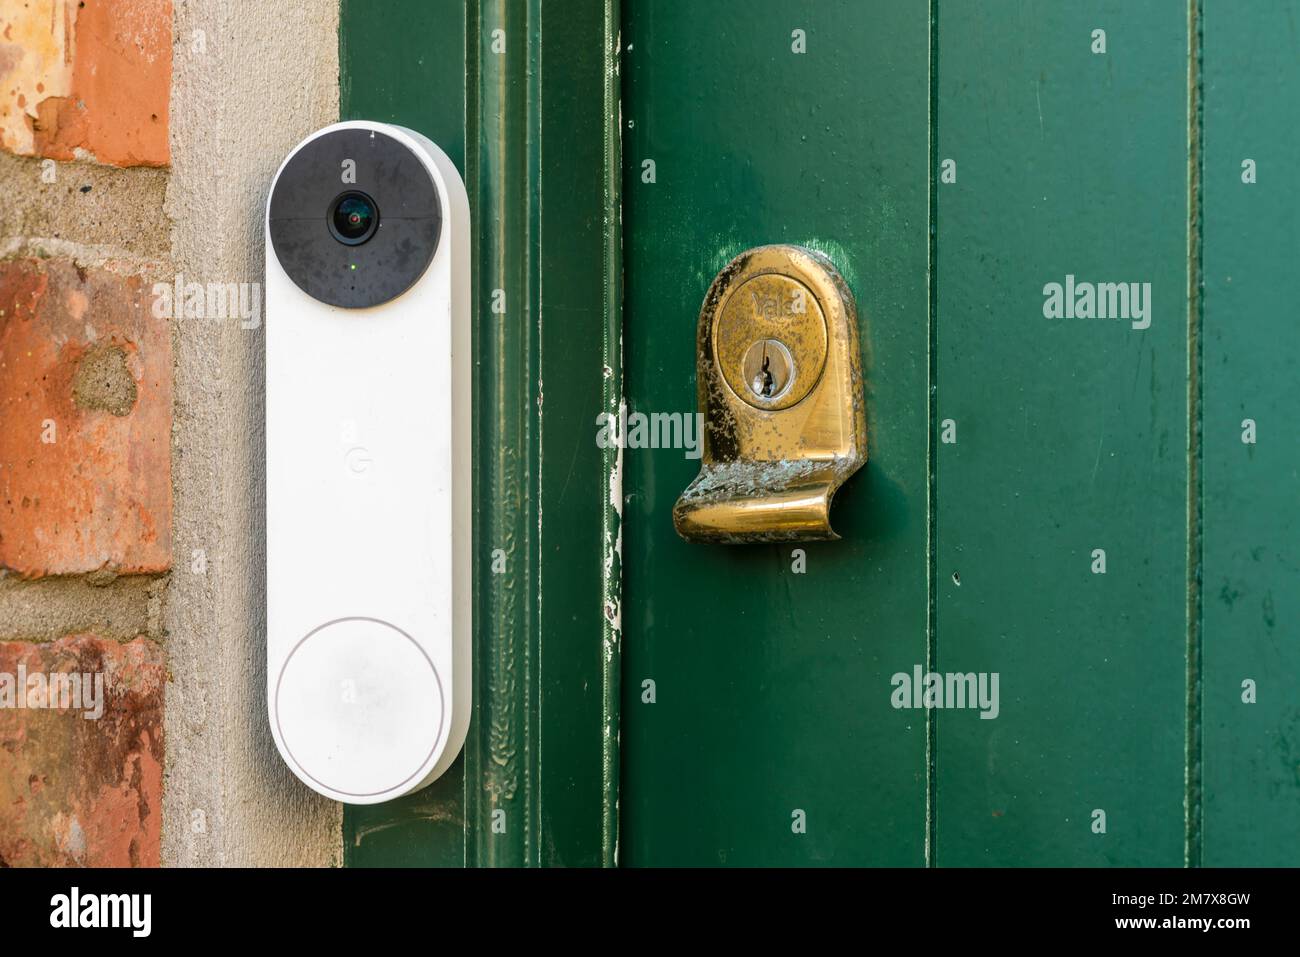 A Google Nest video doorbell on a green door with a brass Yale lock, United Kingdom, UK Stock Photo